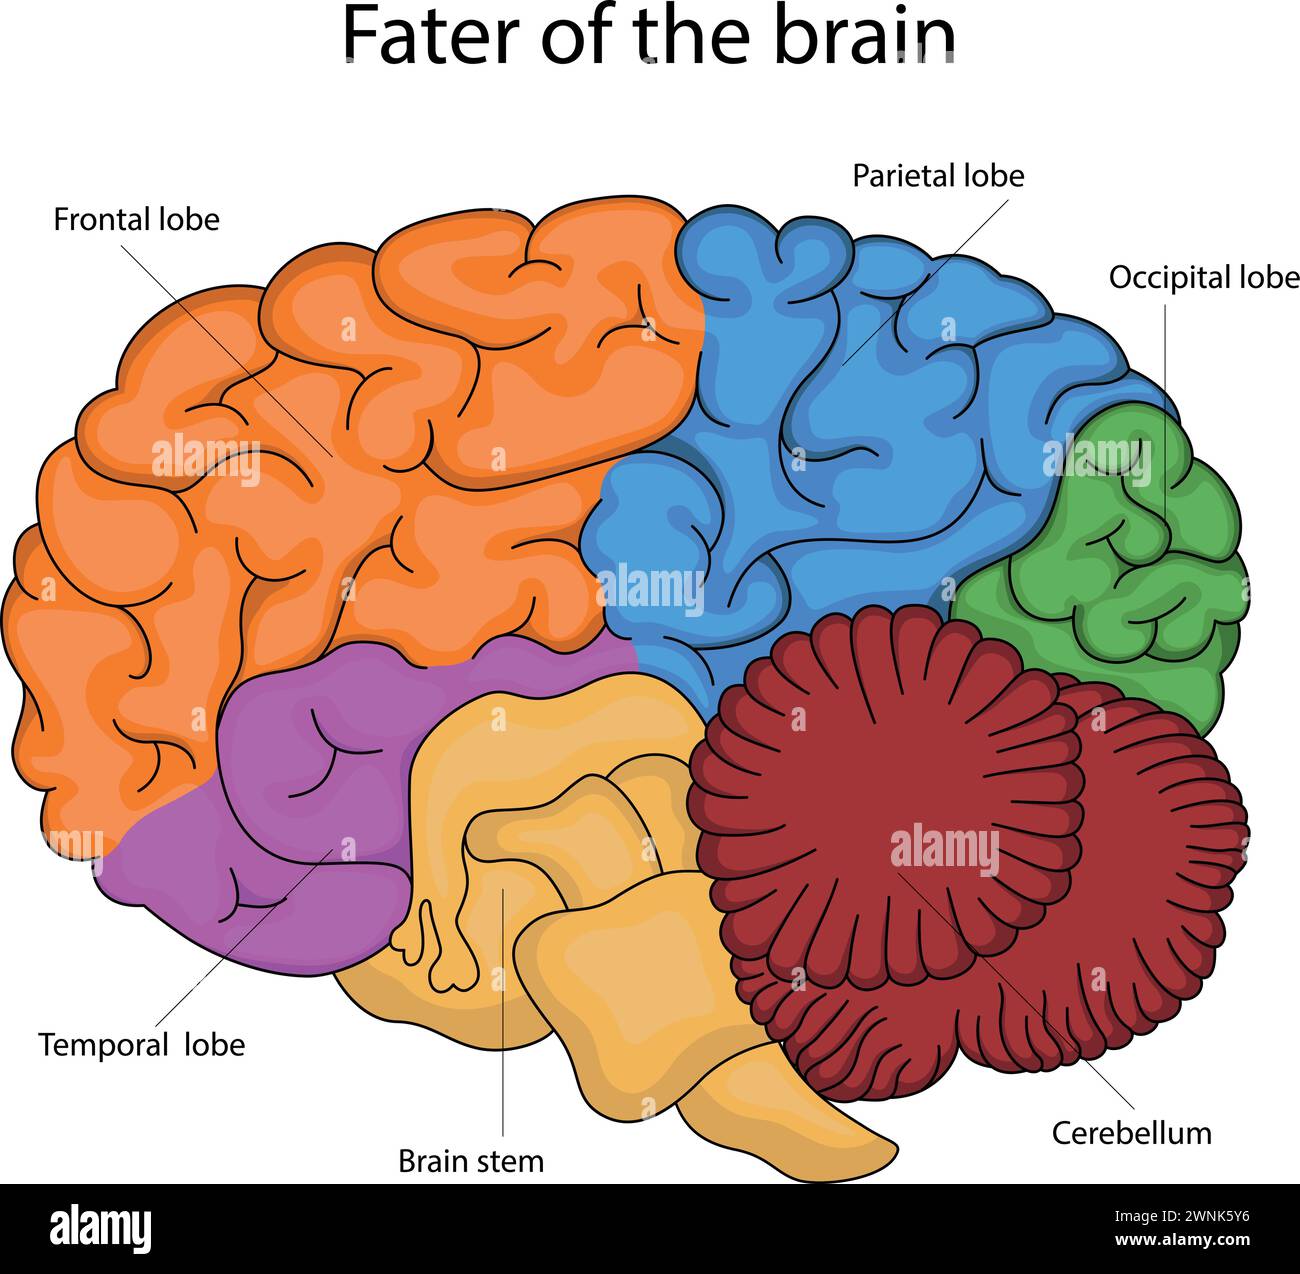 Vector illustration of the fate of the brain. Stock Vector